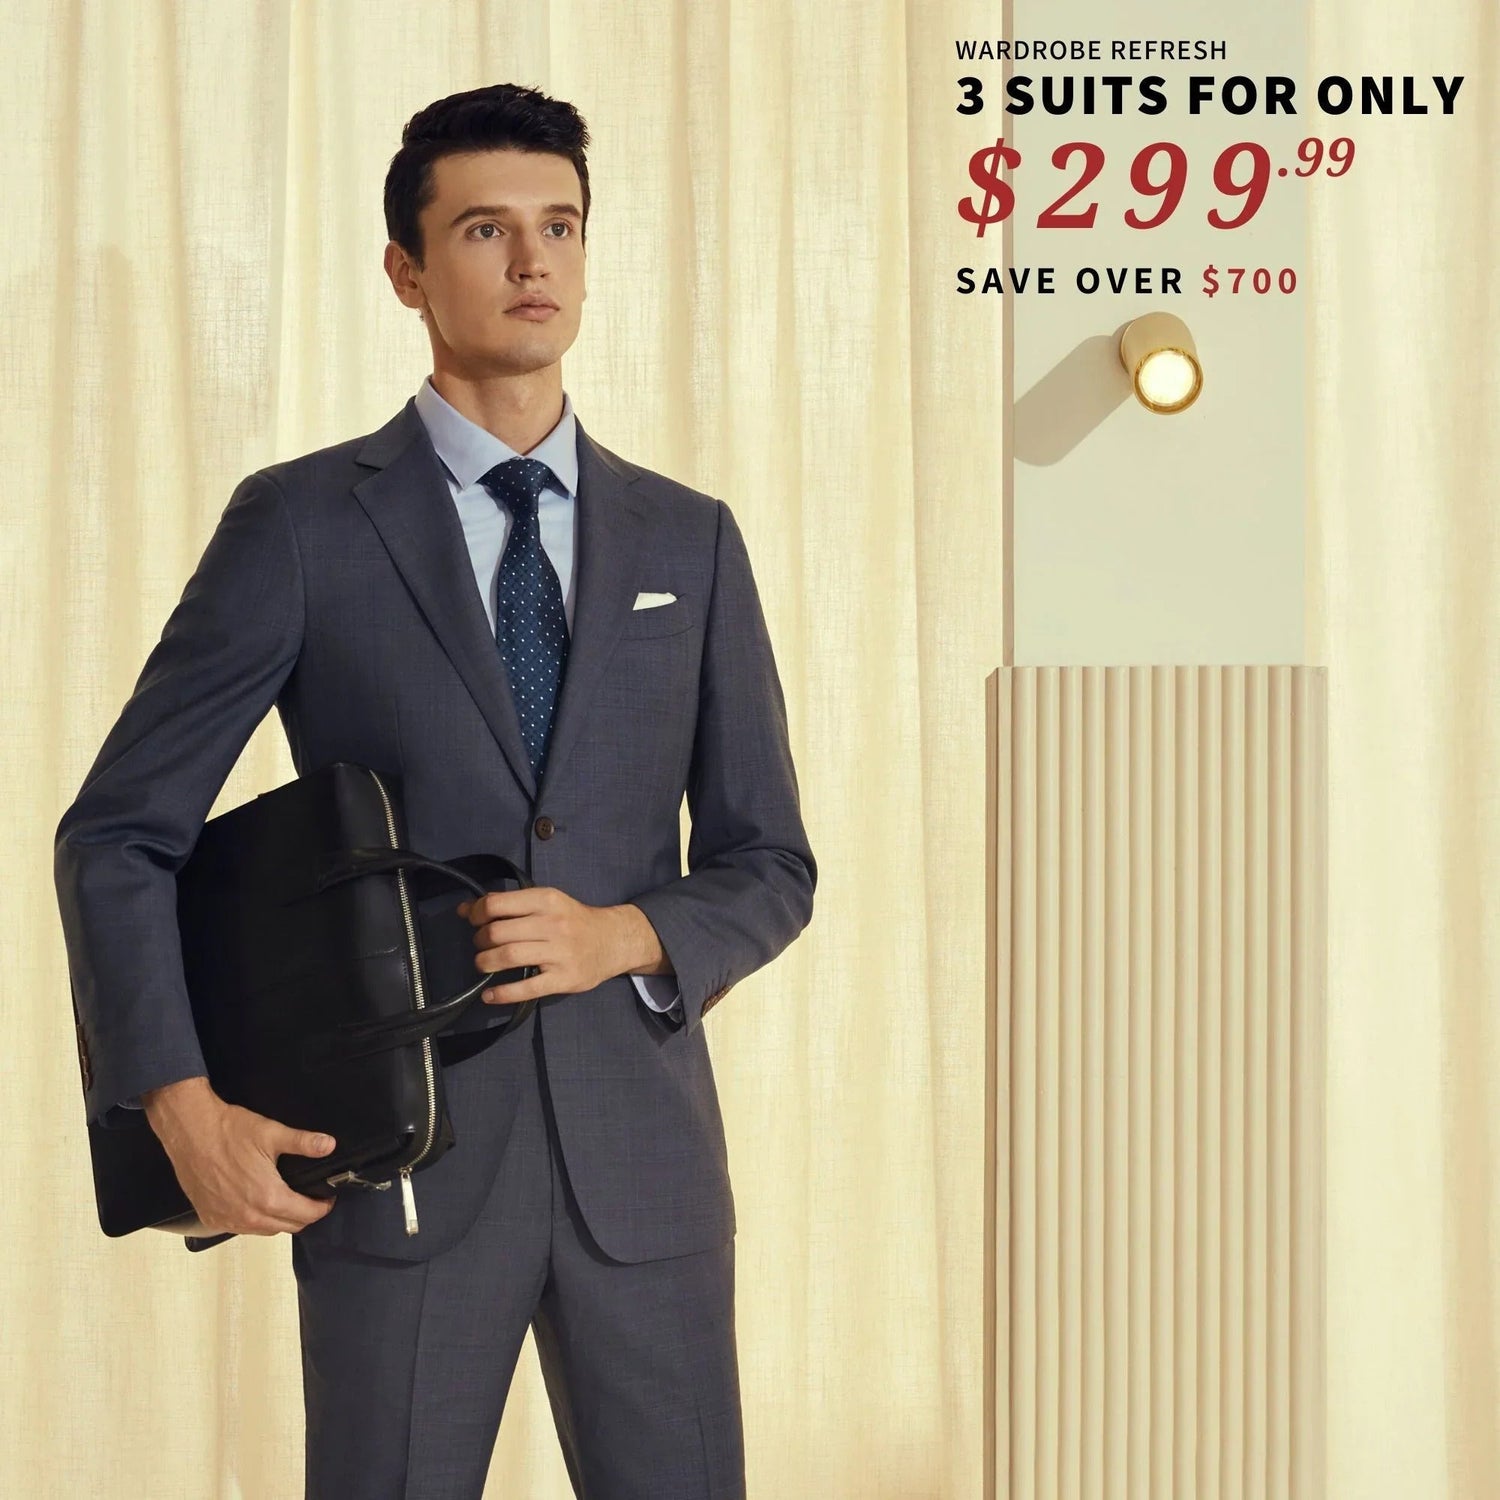 A man in a BYOB suit holding a briefcase, showcasing the waist of his pants featuring the 3 Suits for $299 offer.